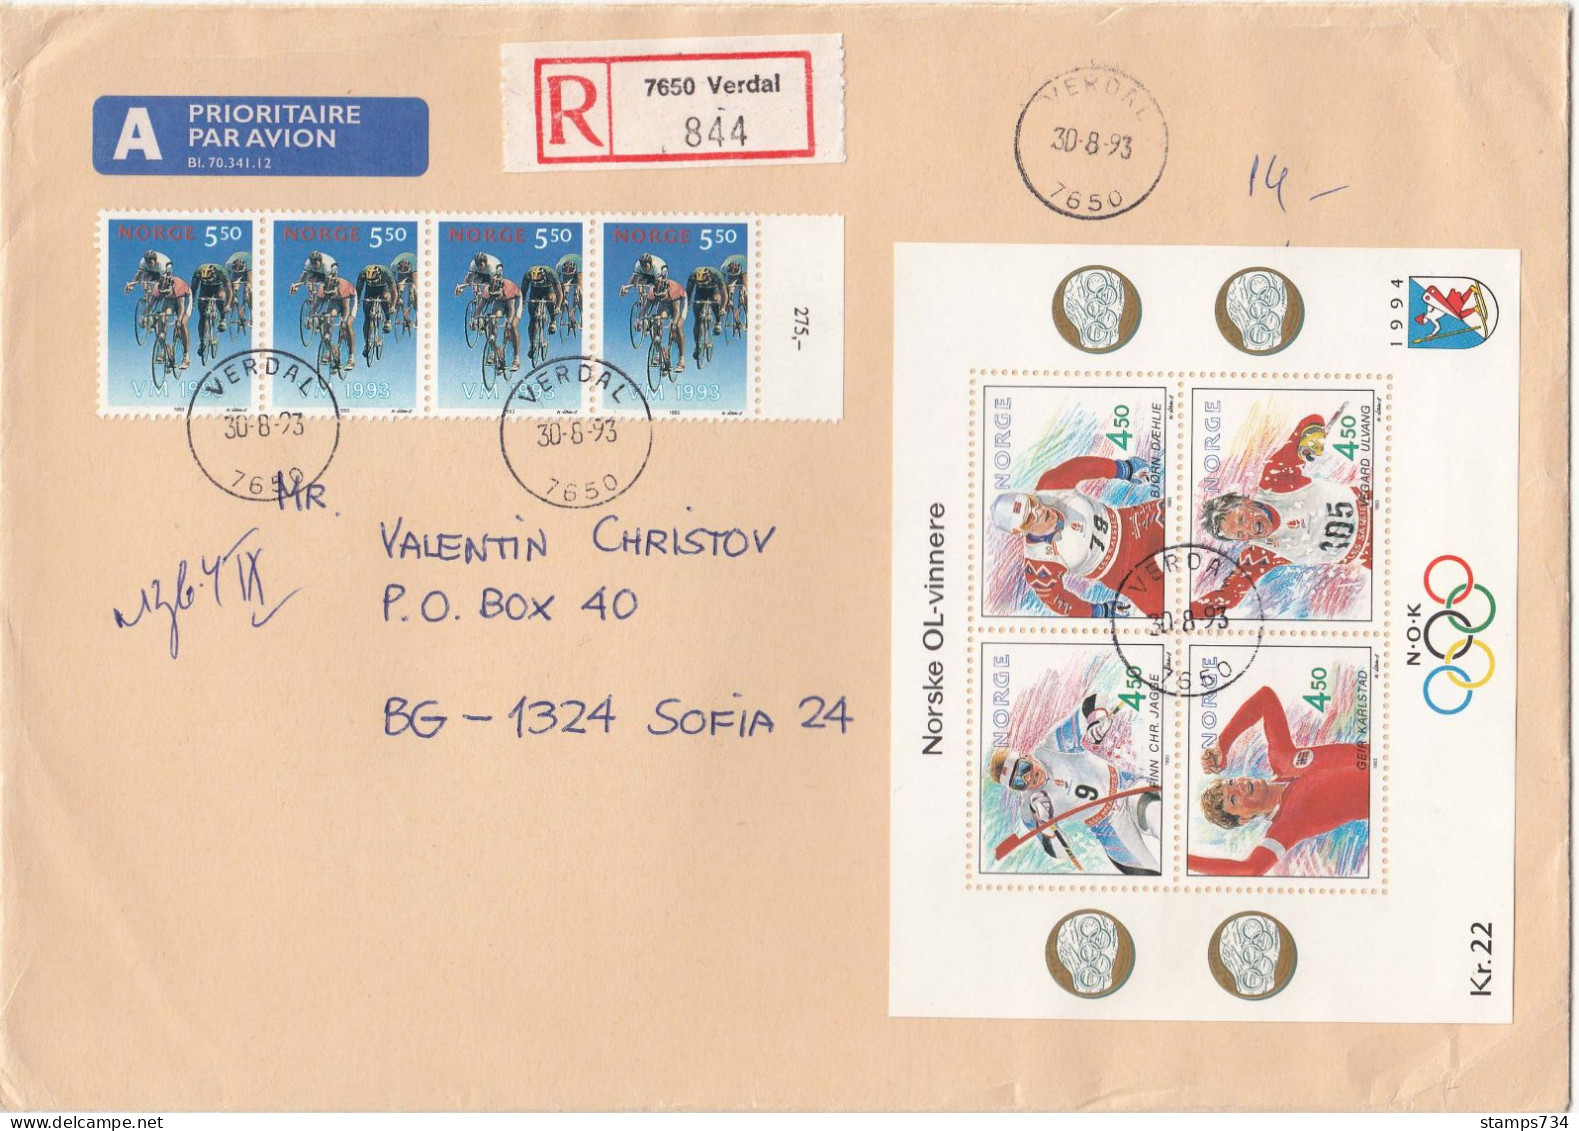 Norway 1993 - Olympic Games Lilehammer'94-s/sh,Cycling VM-4 Stamps, Letter Registred+priority From Verdal To Sofia - Storia Postale